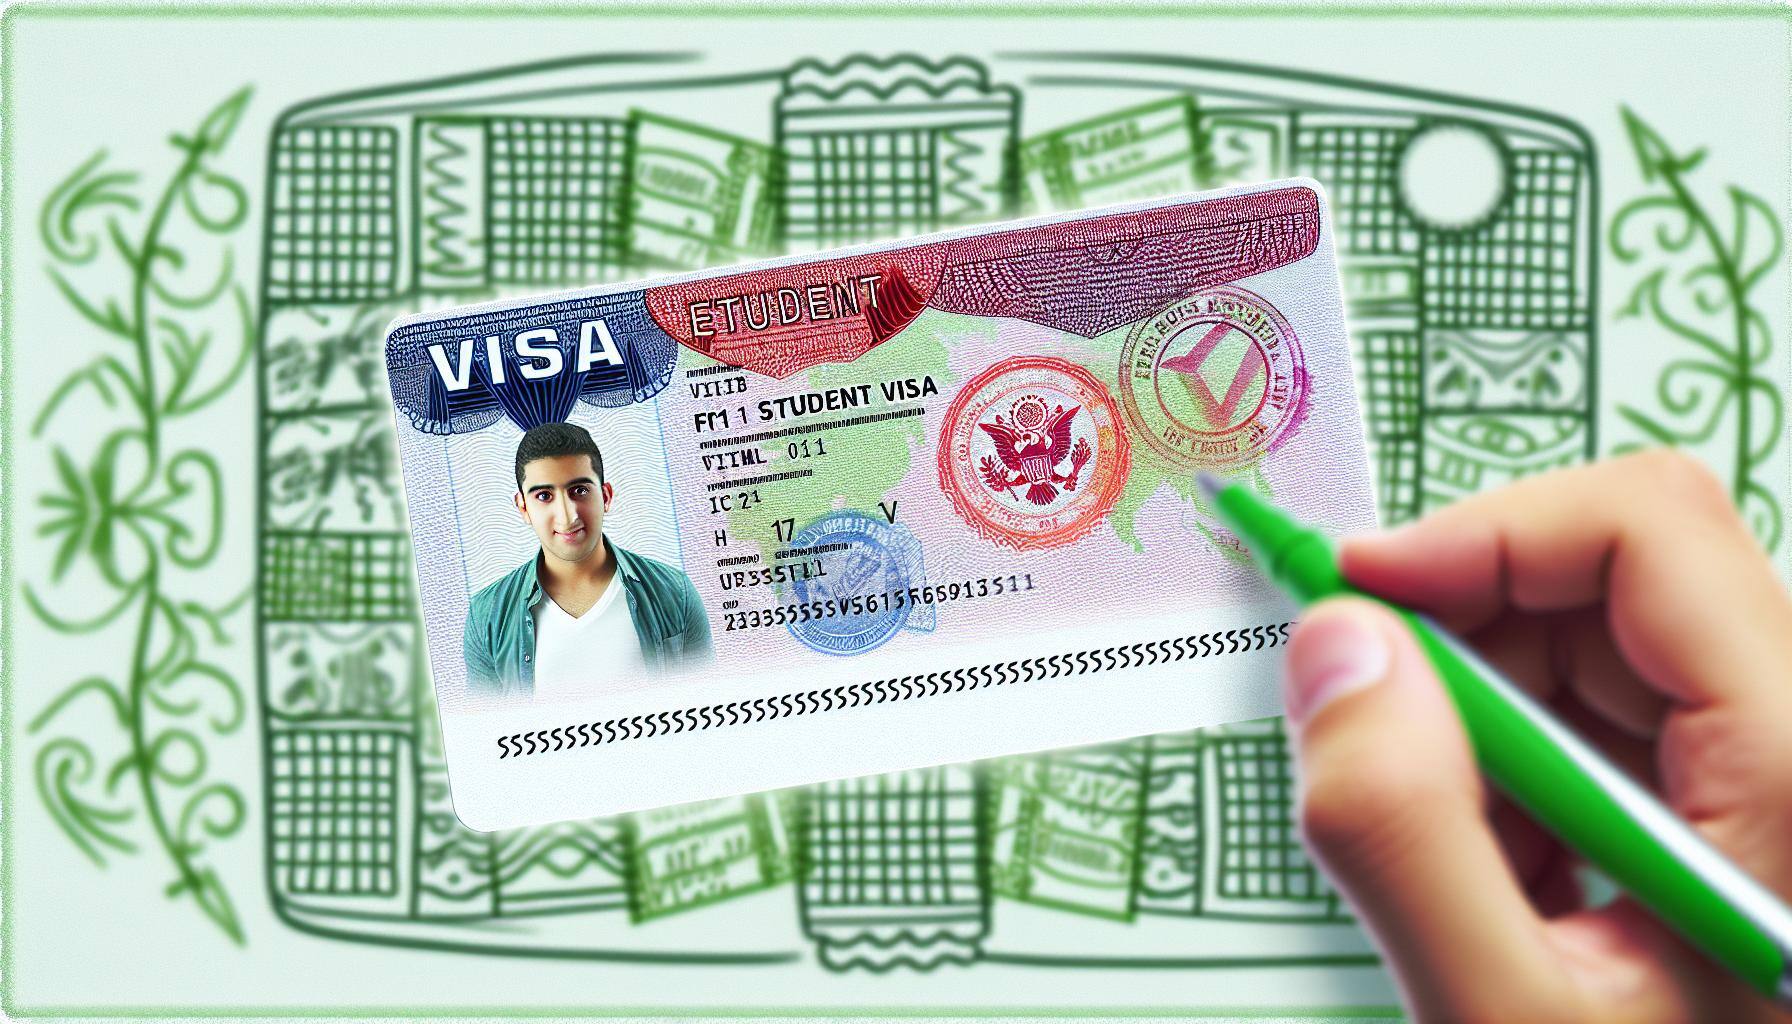 f1 visa for students